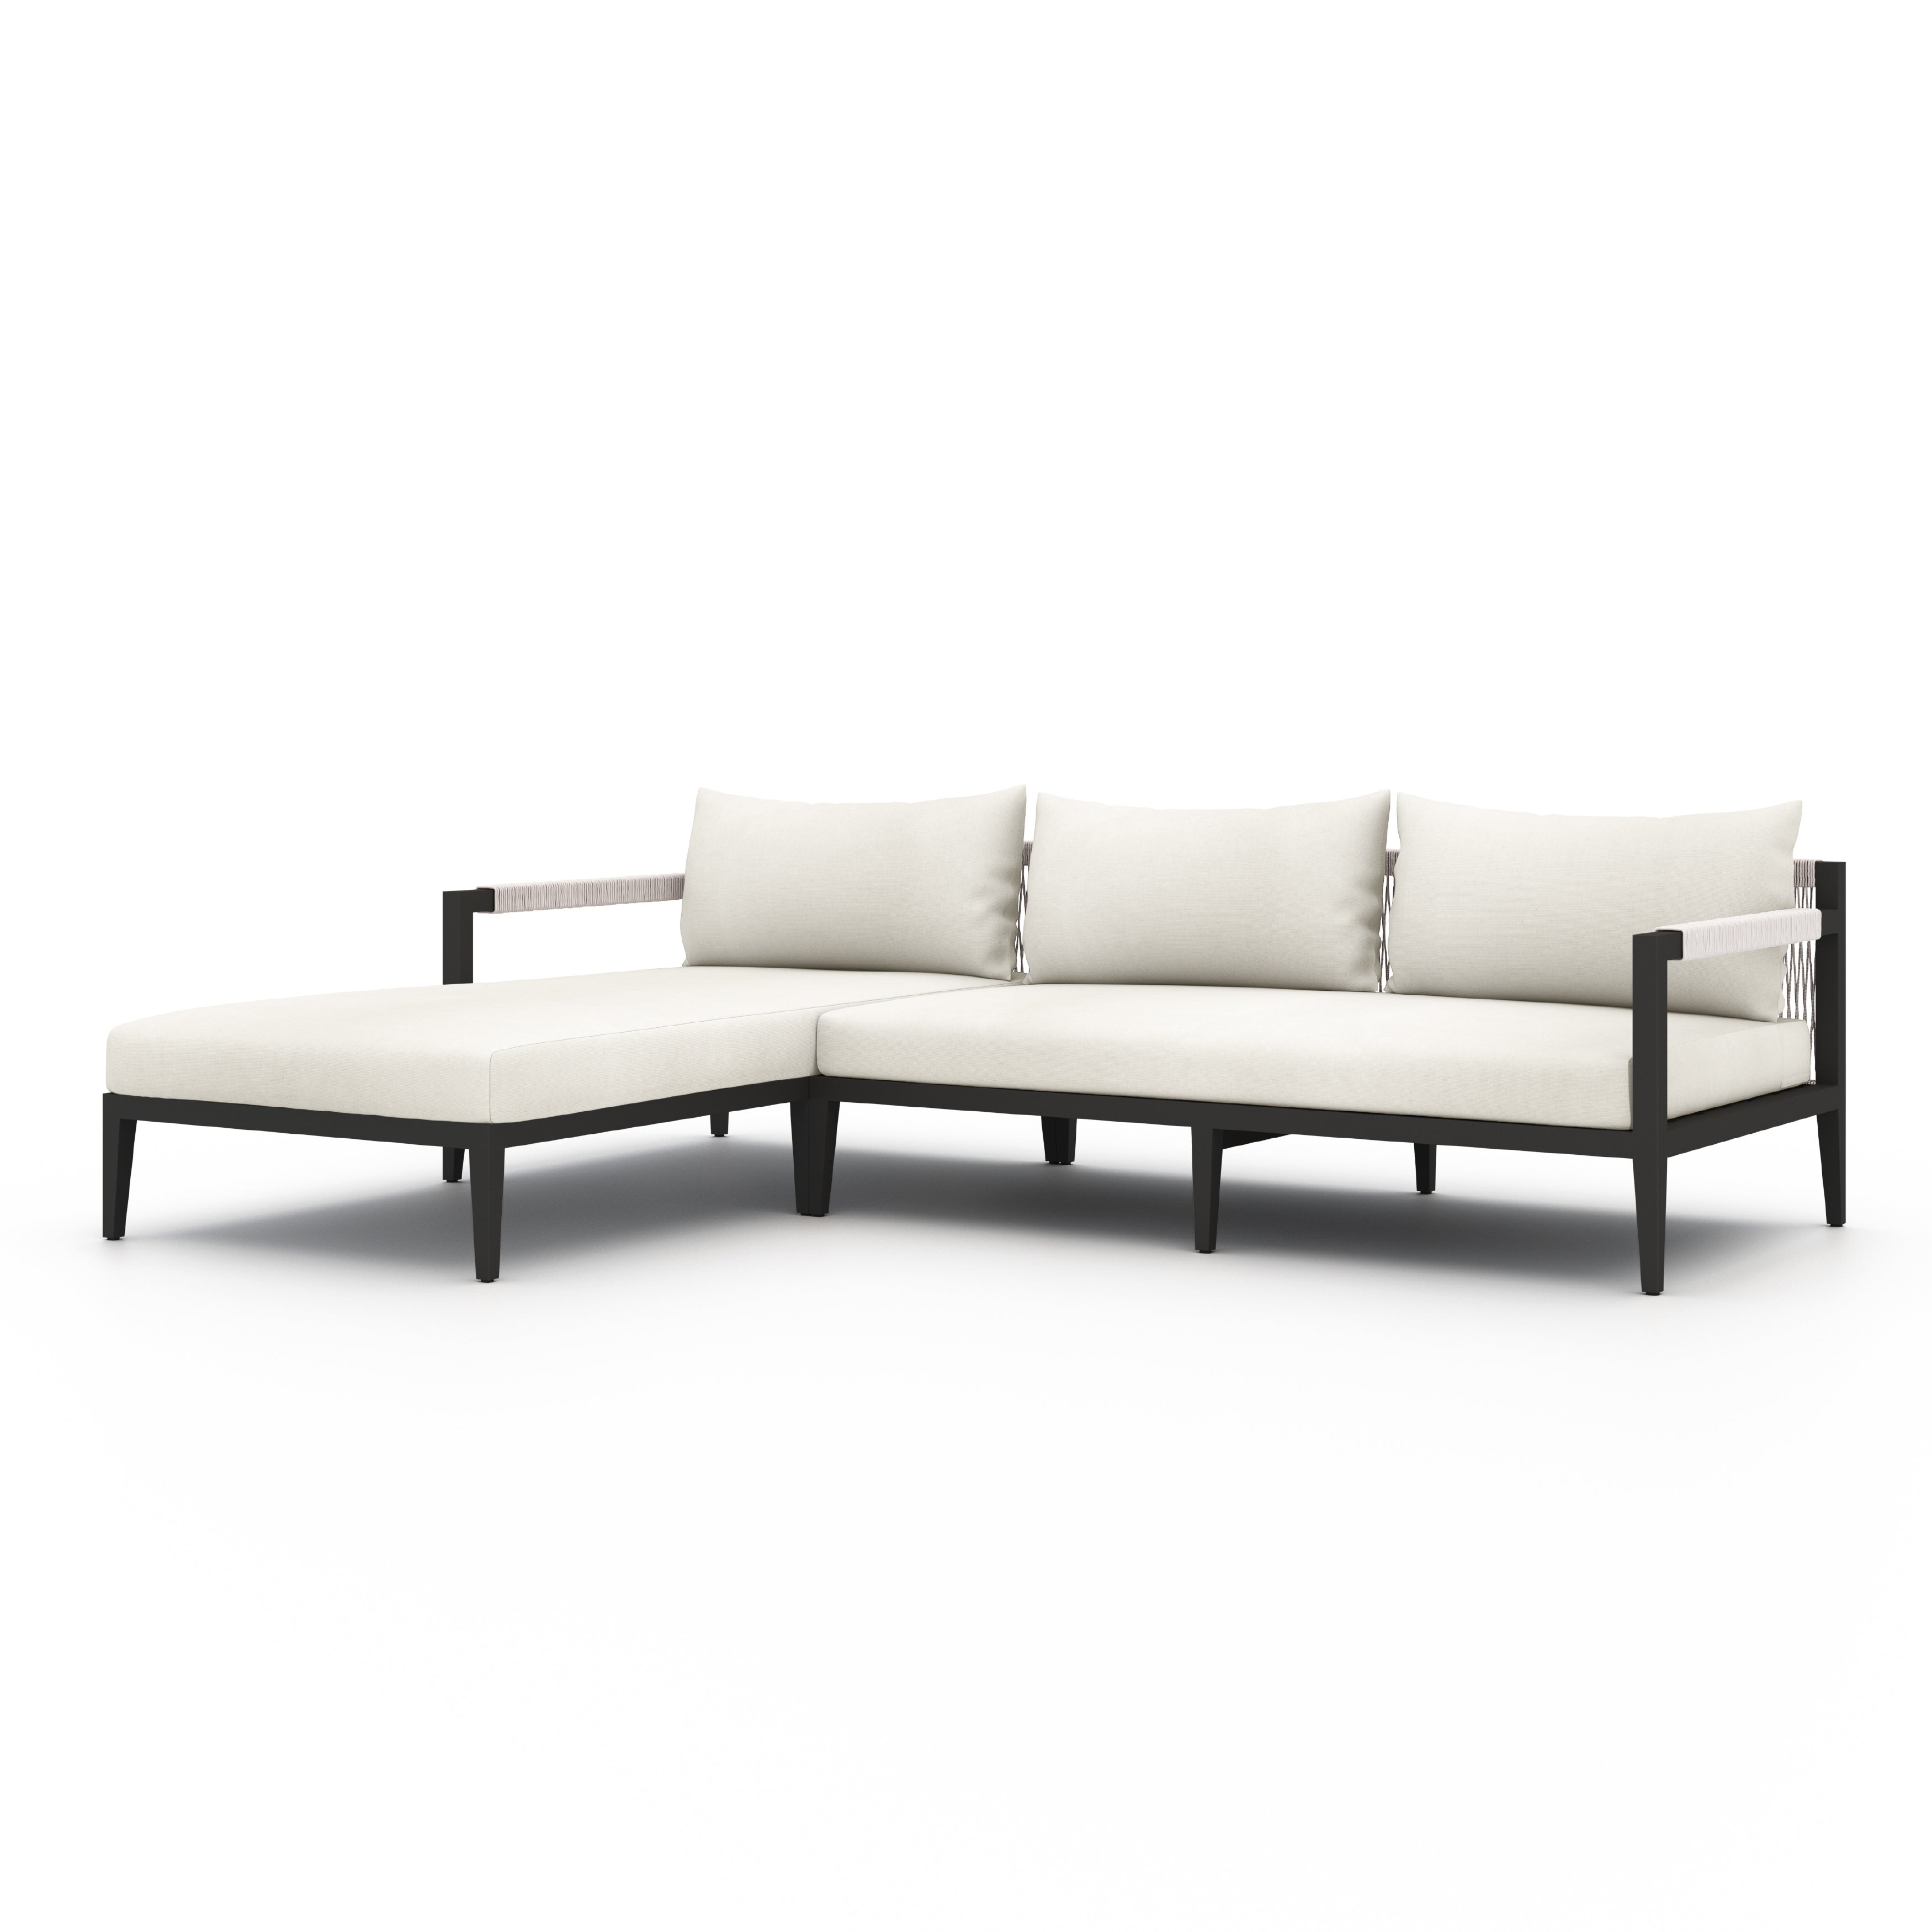 We love the rope-arm detail on this Sherwood Outdoor 2 Piece Sectional - Natural Ivory. Bronze-finished aluminum forms a linear frame for UV-resistant and water-repellent Sunproof fabric in an inviting ivory - sure to elevate the look of an patio or pool side area!   Cover or store indoors during inclement weather.  Overall Dimensions: 94.50